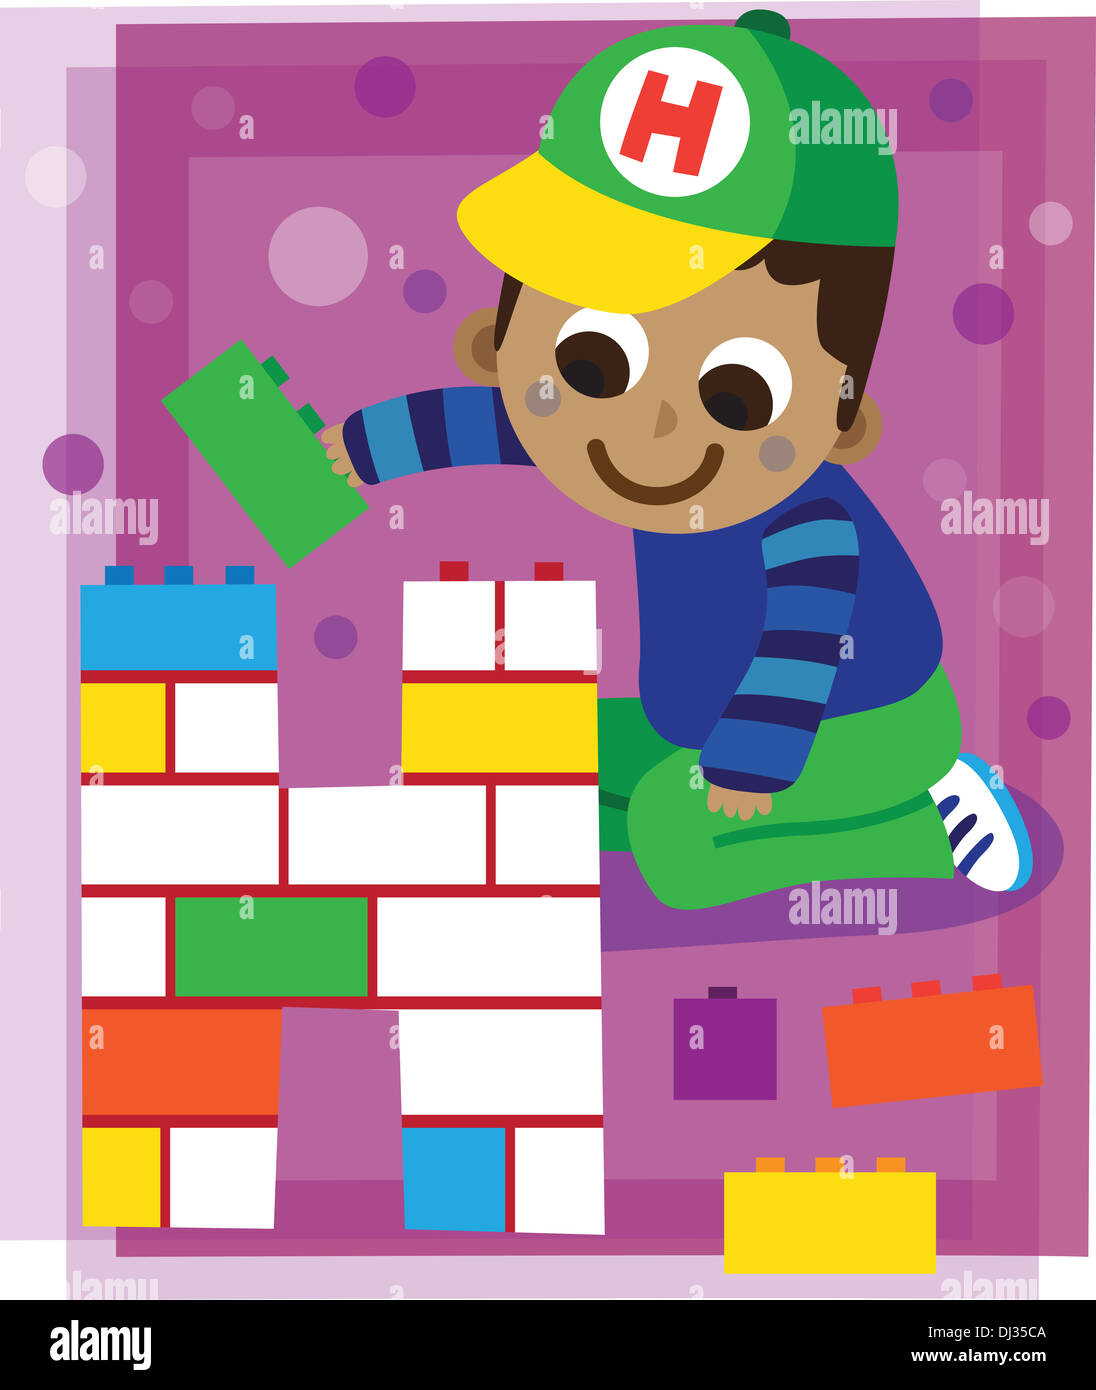 Illustration of boy making letter h with blocks Stock Photo